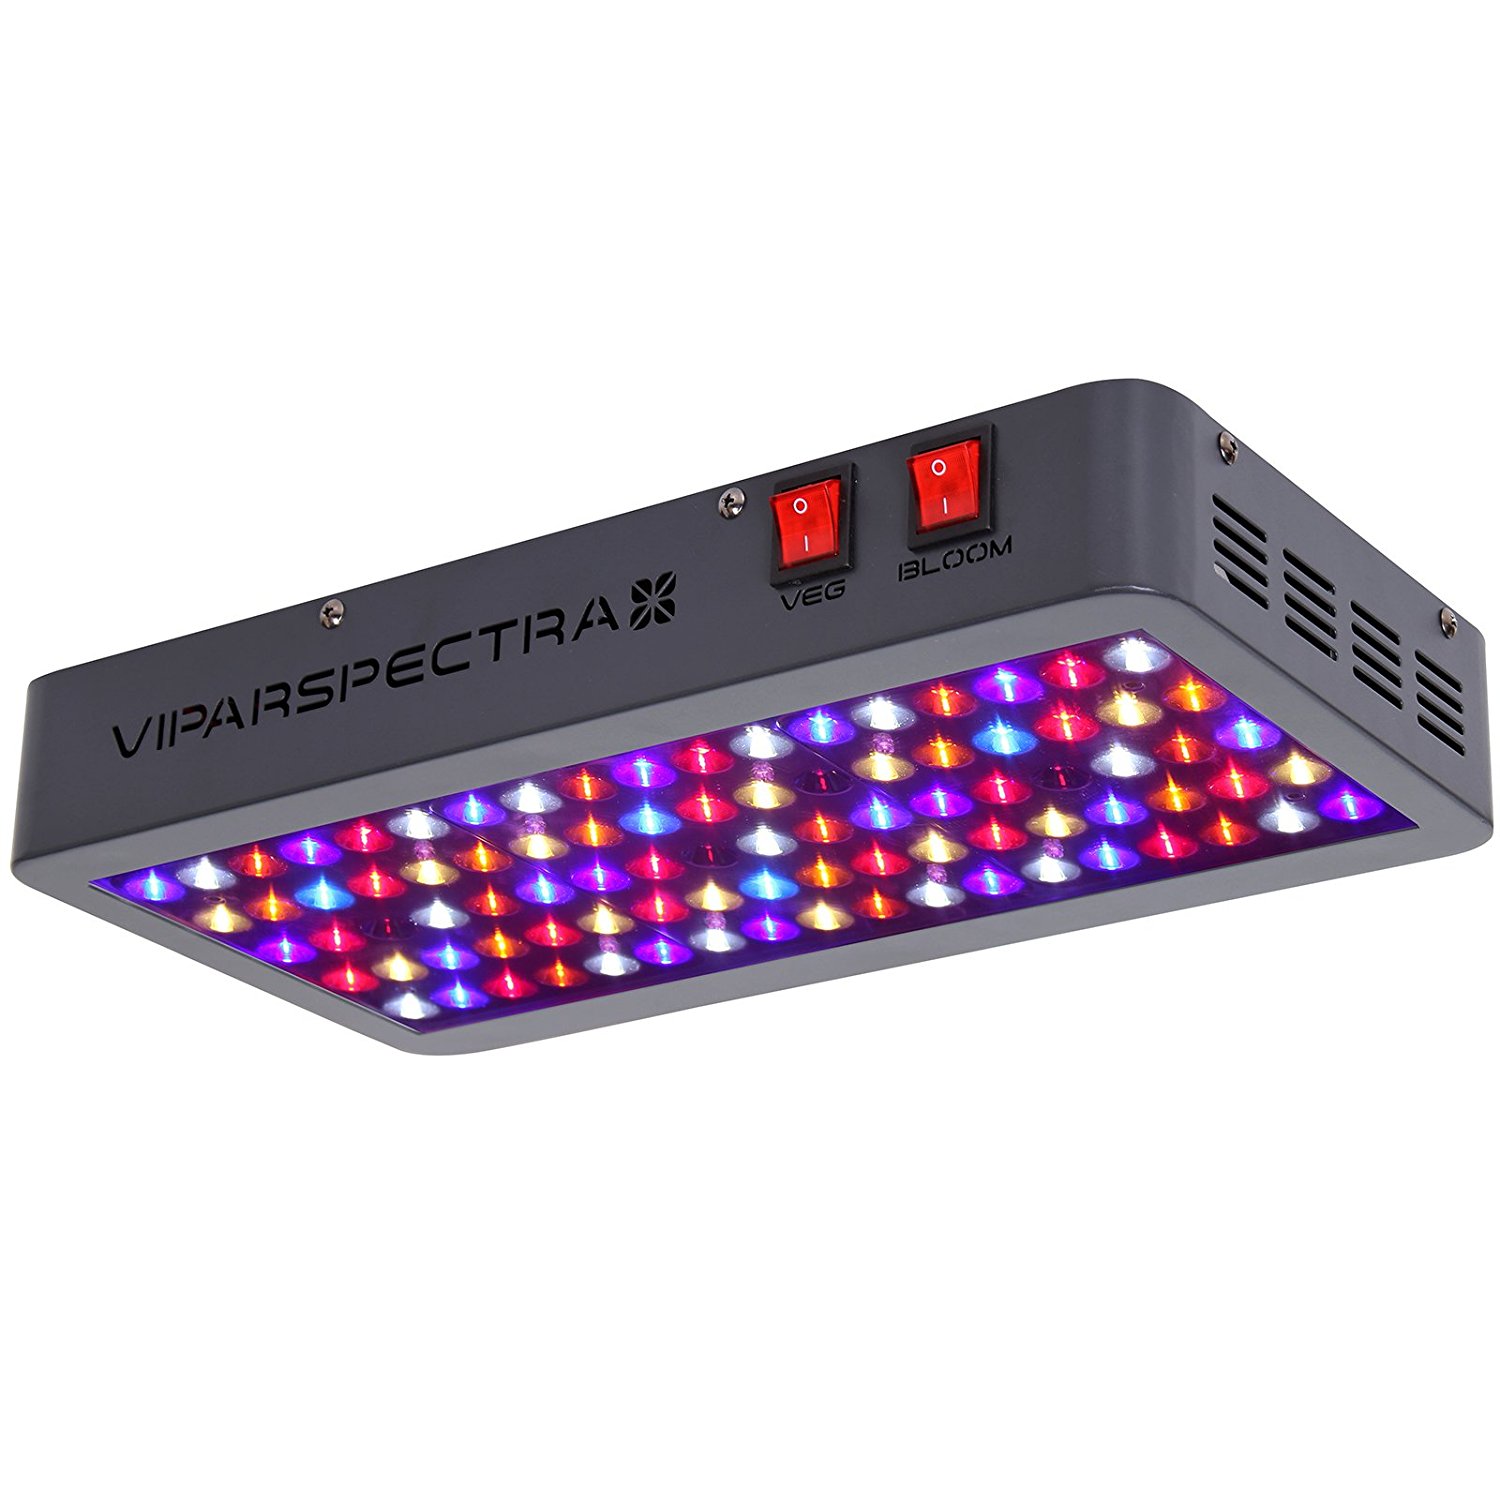 VIPARSPECTRA Reflector-Series 450W LED Grow Light Review